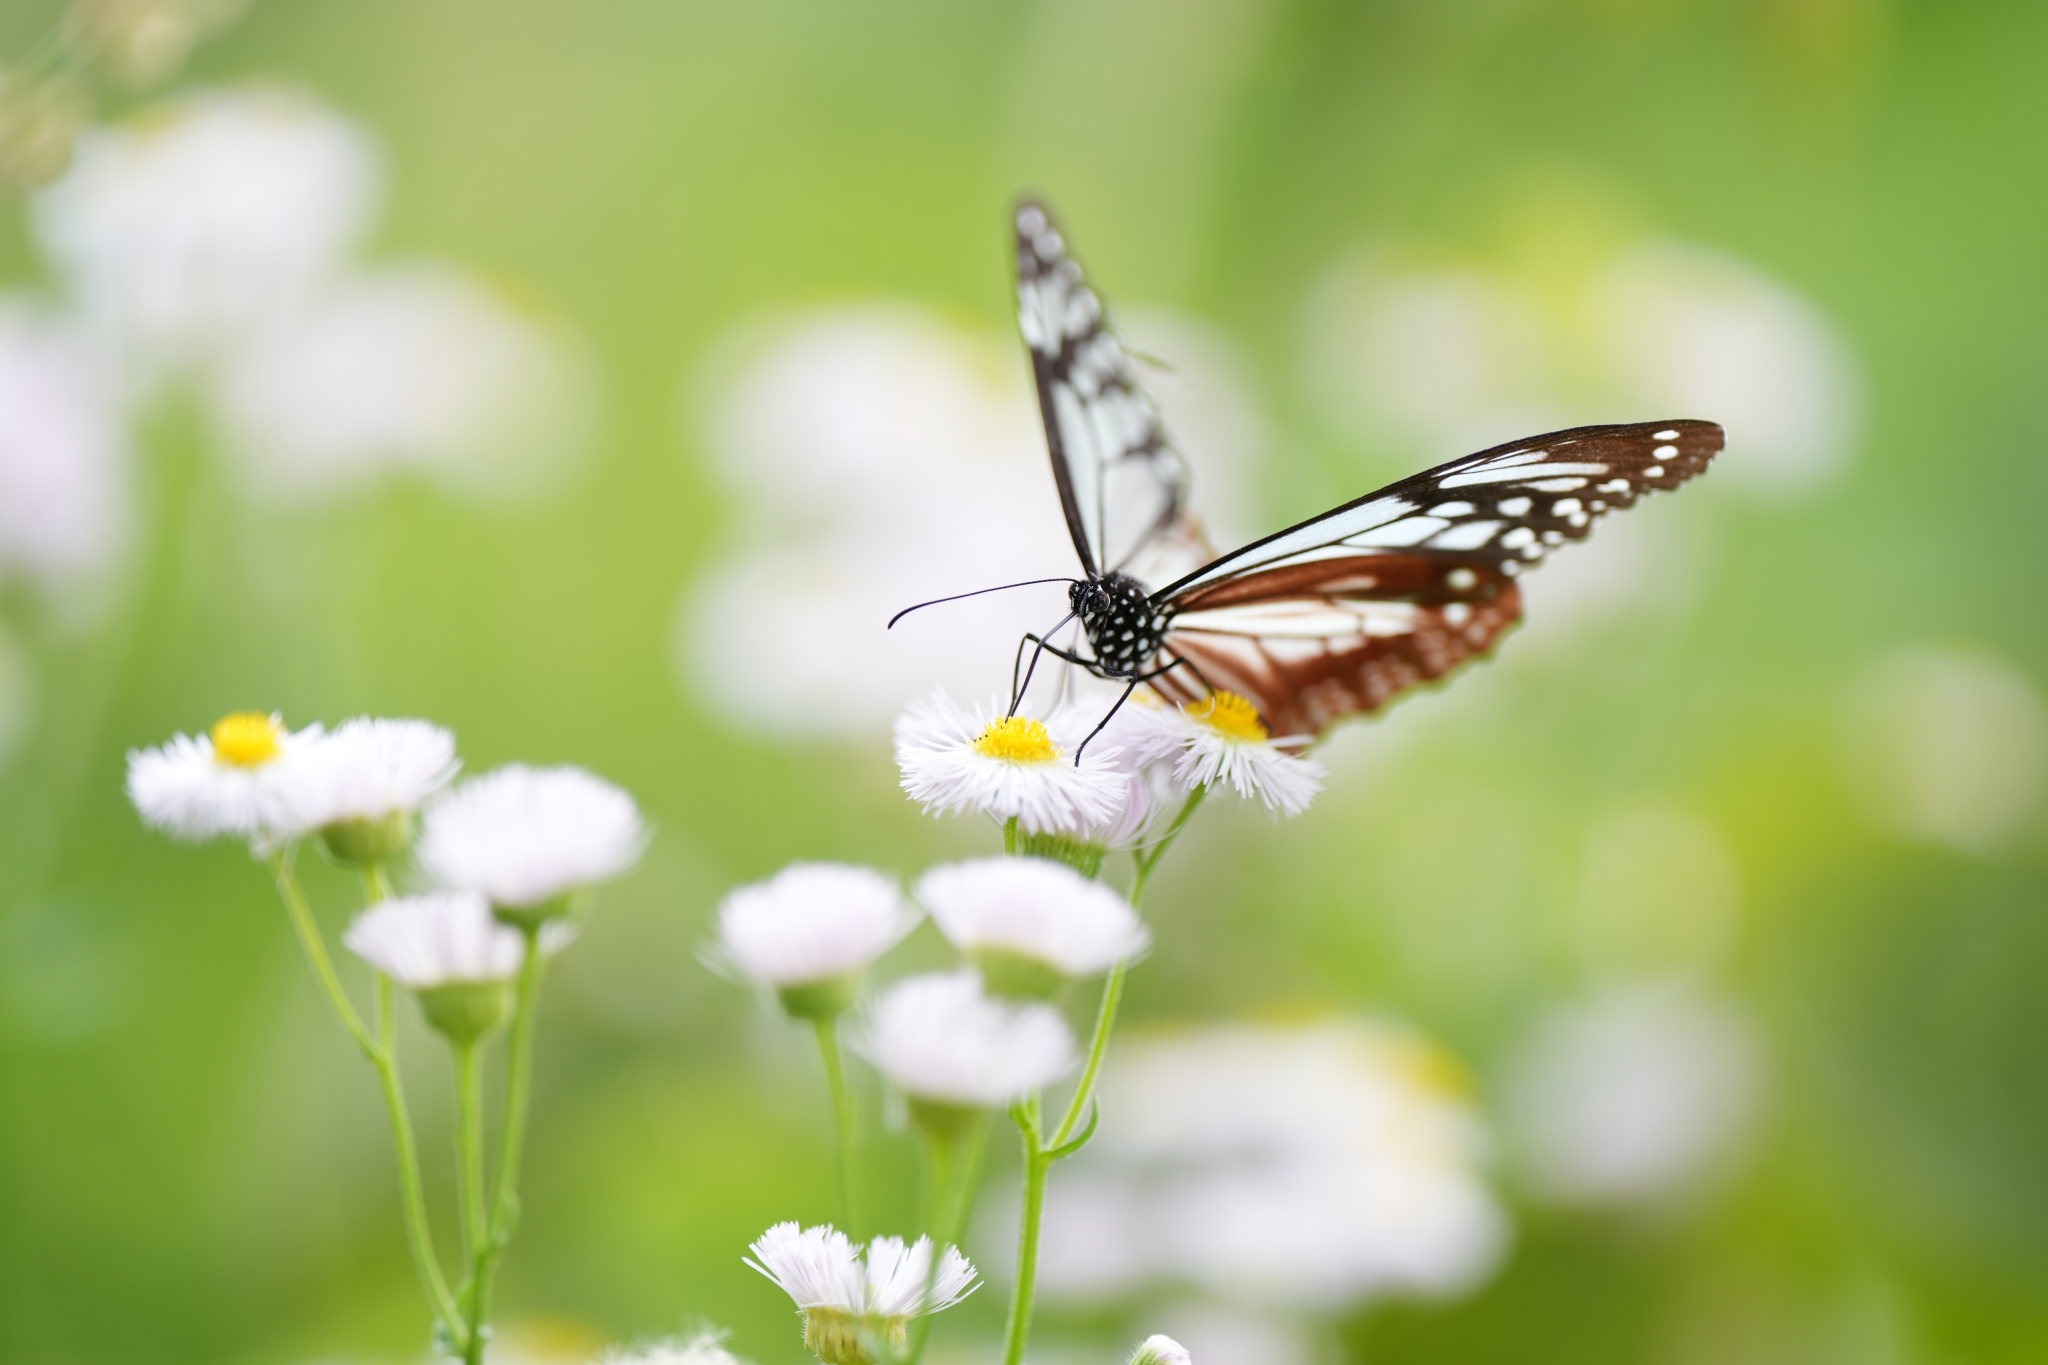 A butterfly feeding off a flower with flowers in bokeh background